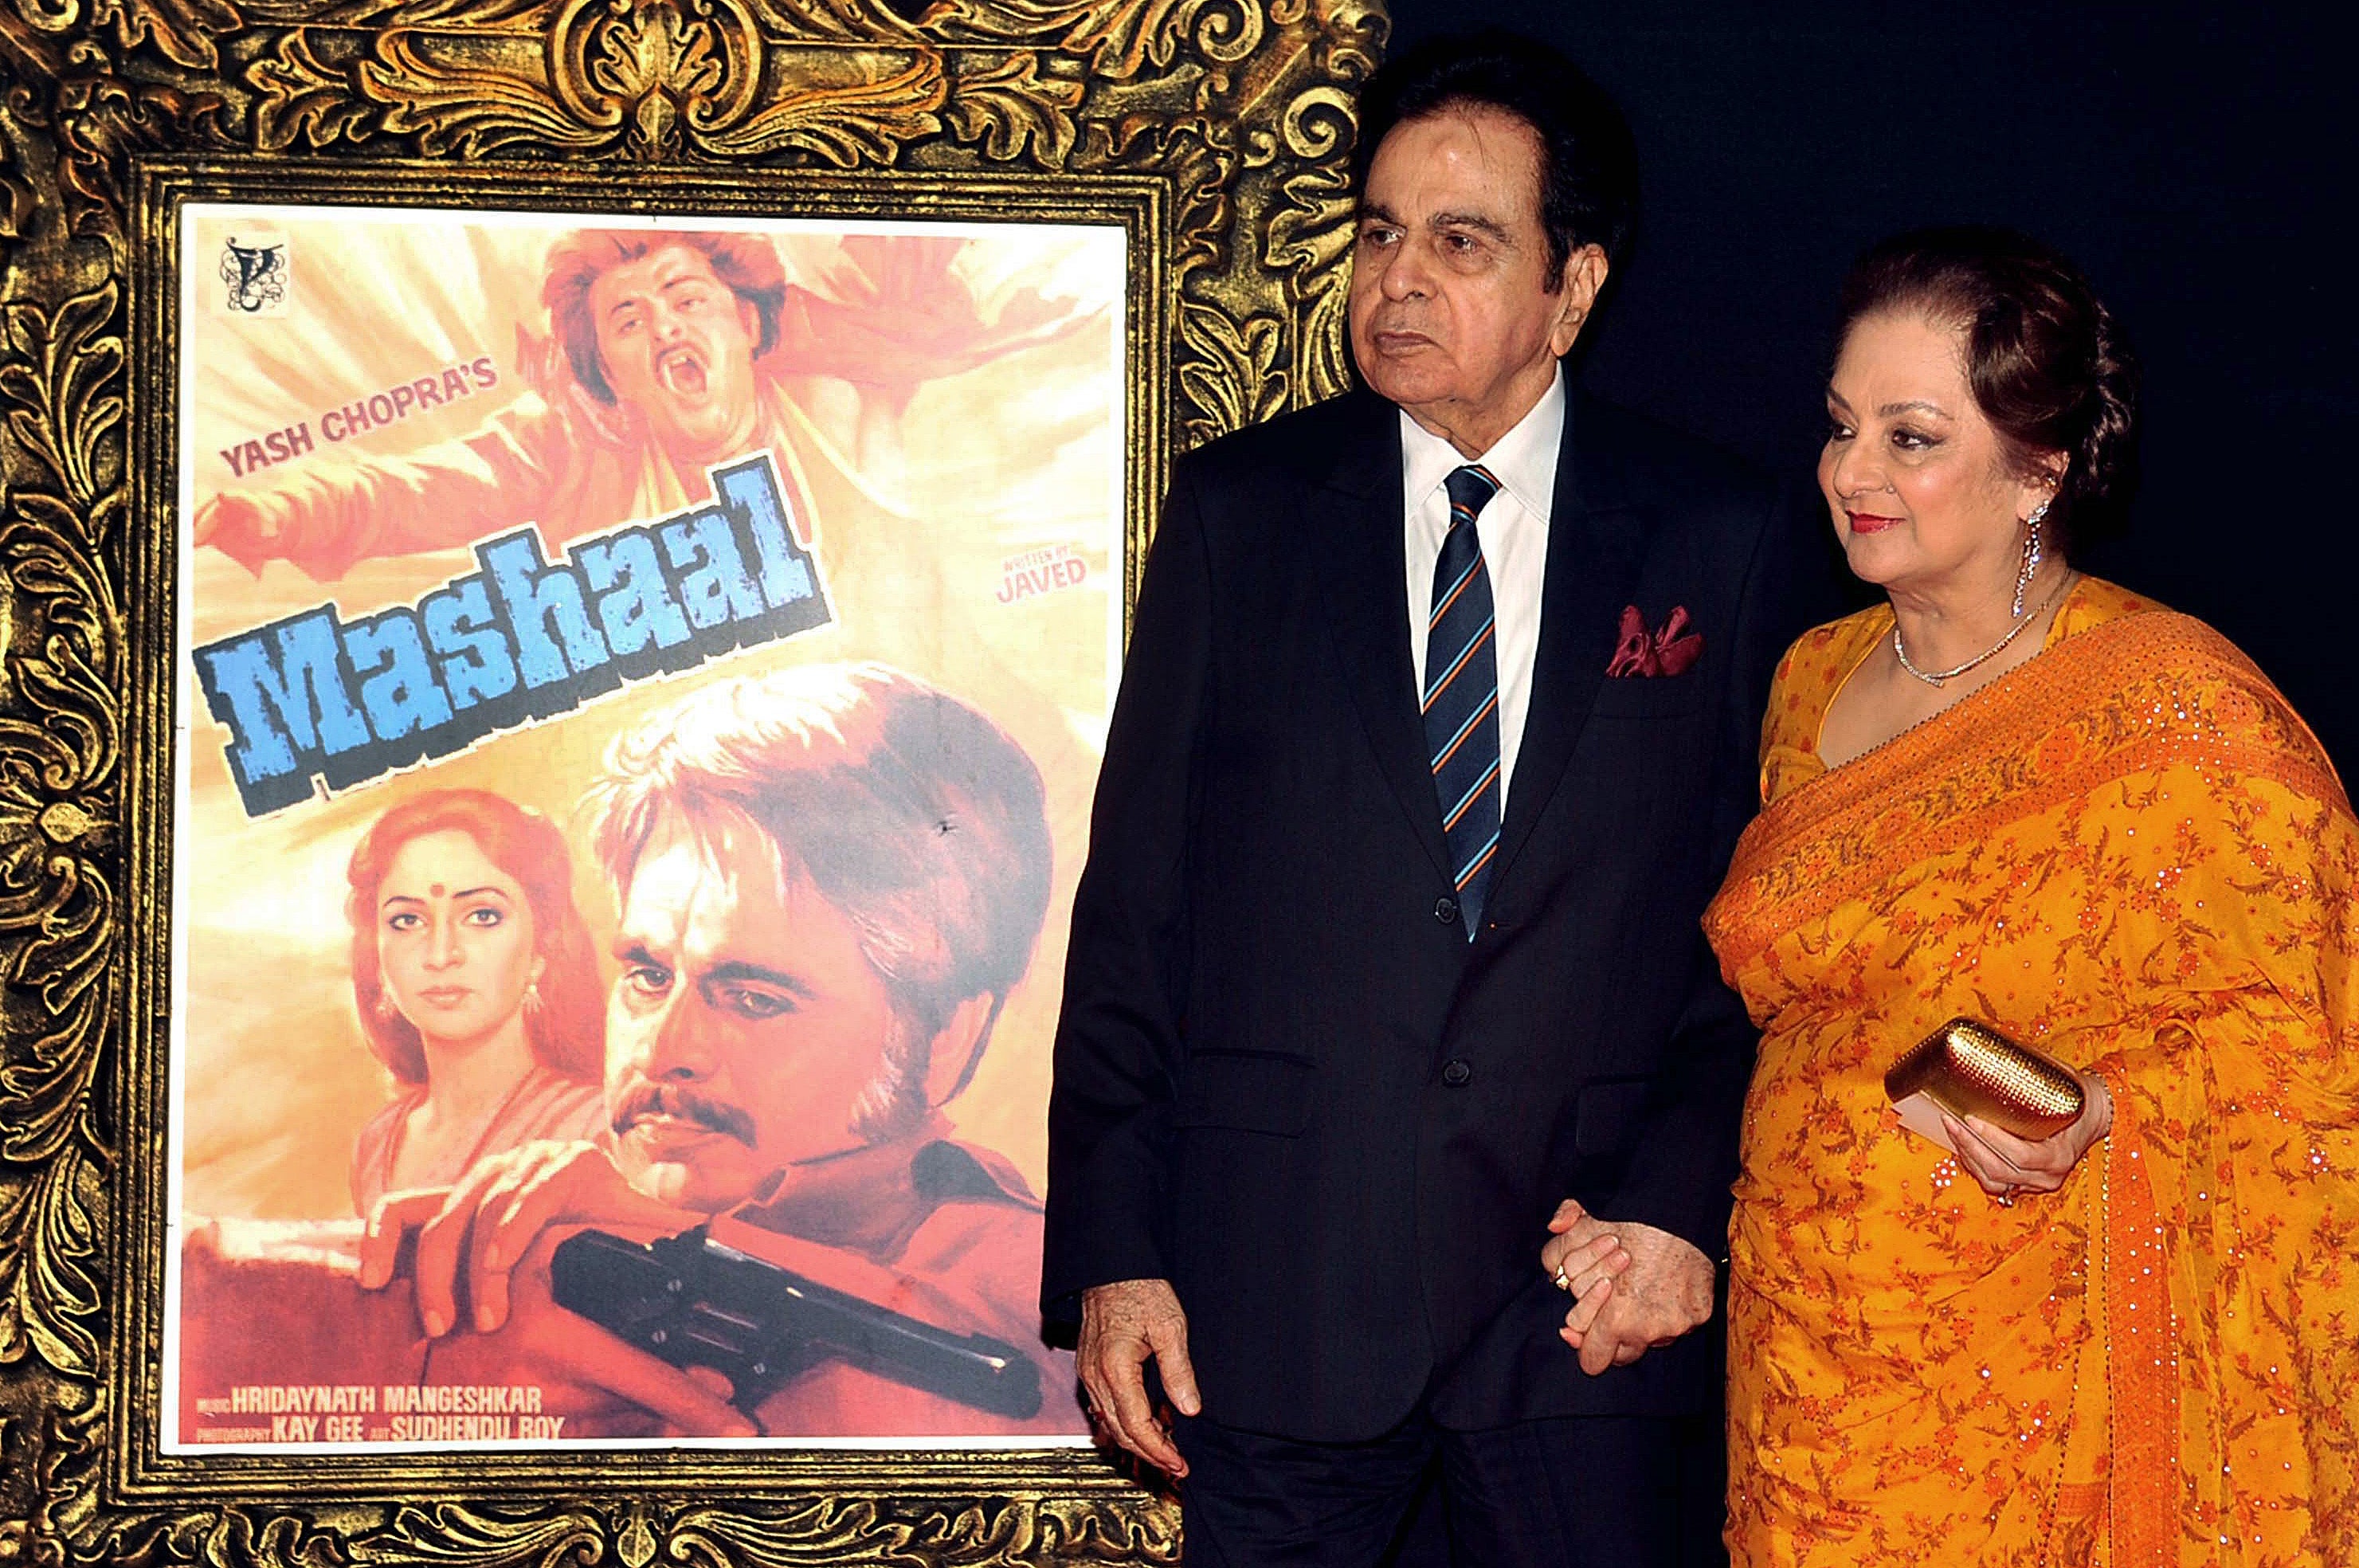 Indian Bollywood film actor Dilip Kumar (L) and his wife Saira Banu pose on the red carpet at a film premiere in 2012